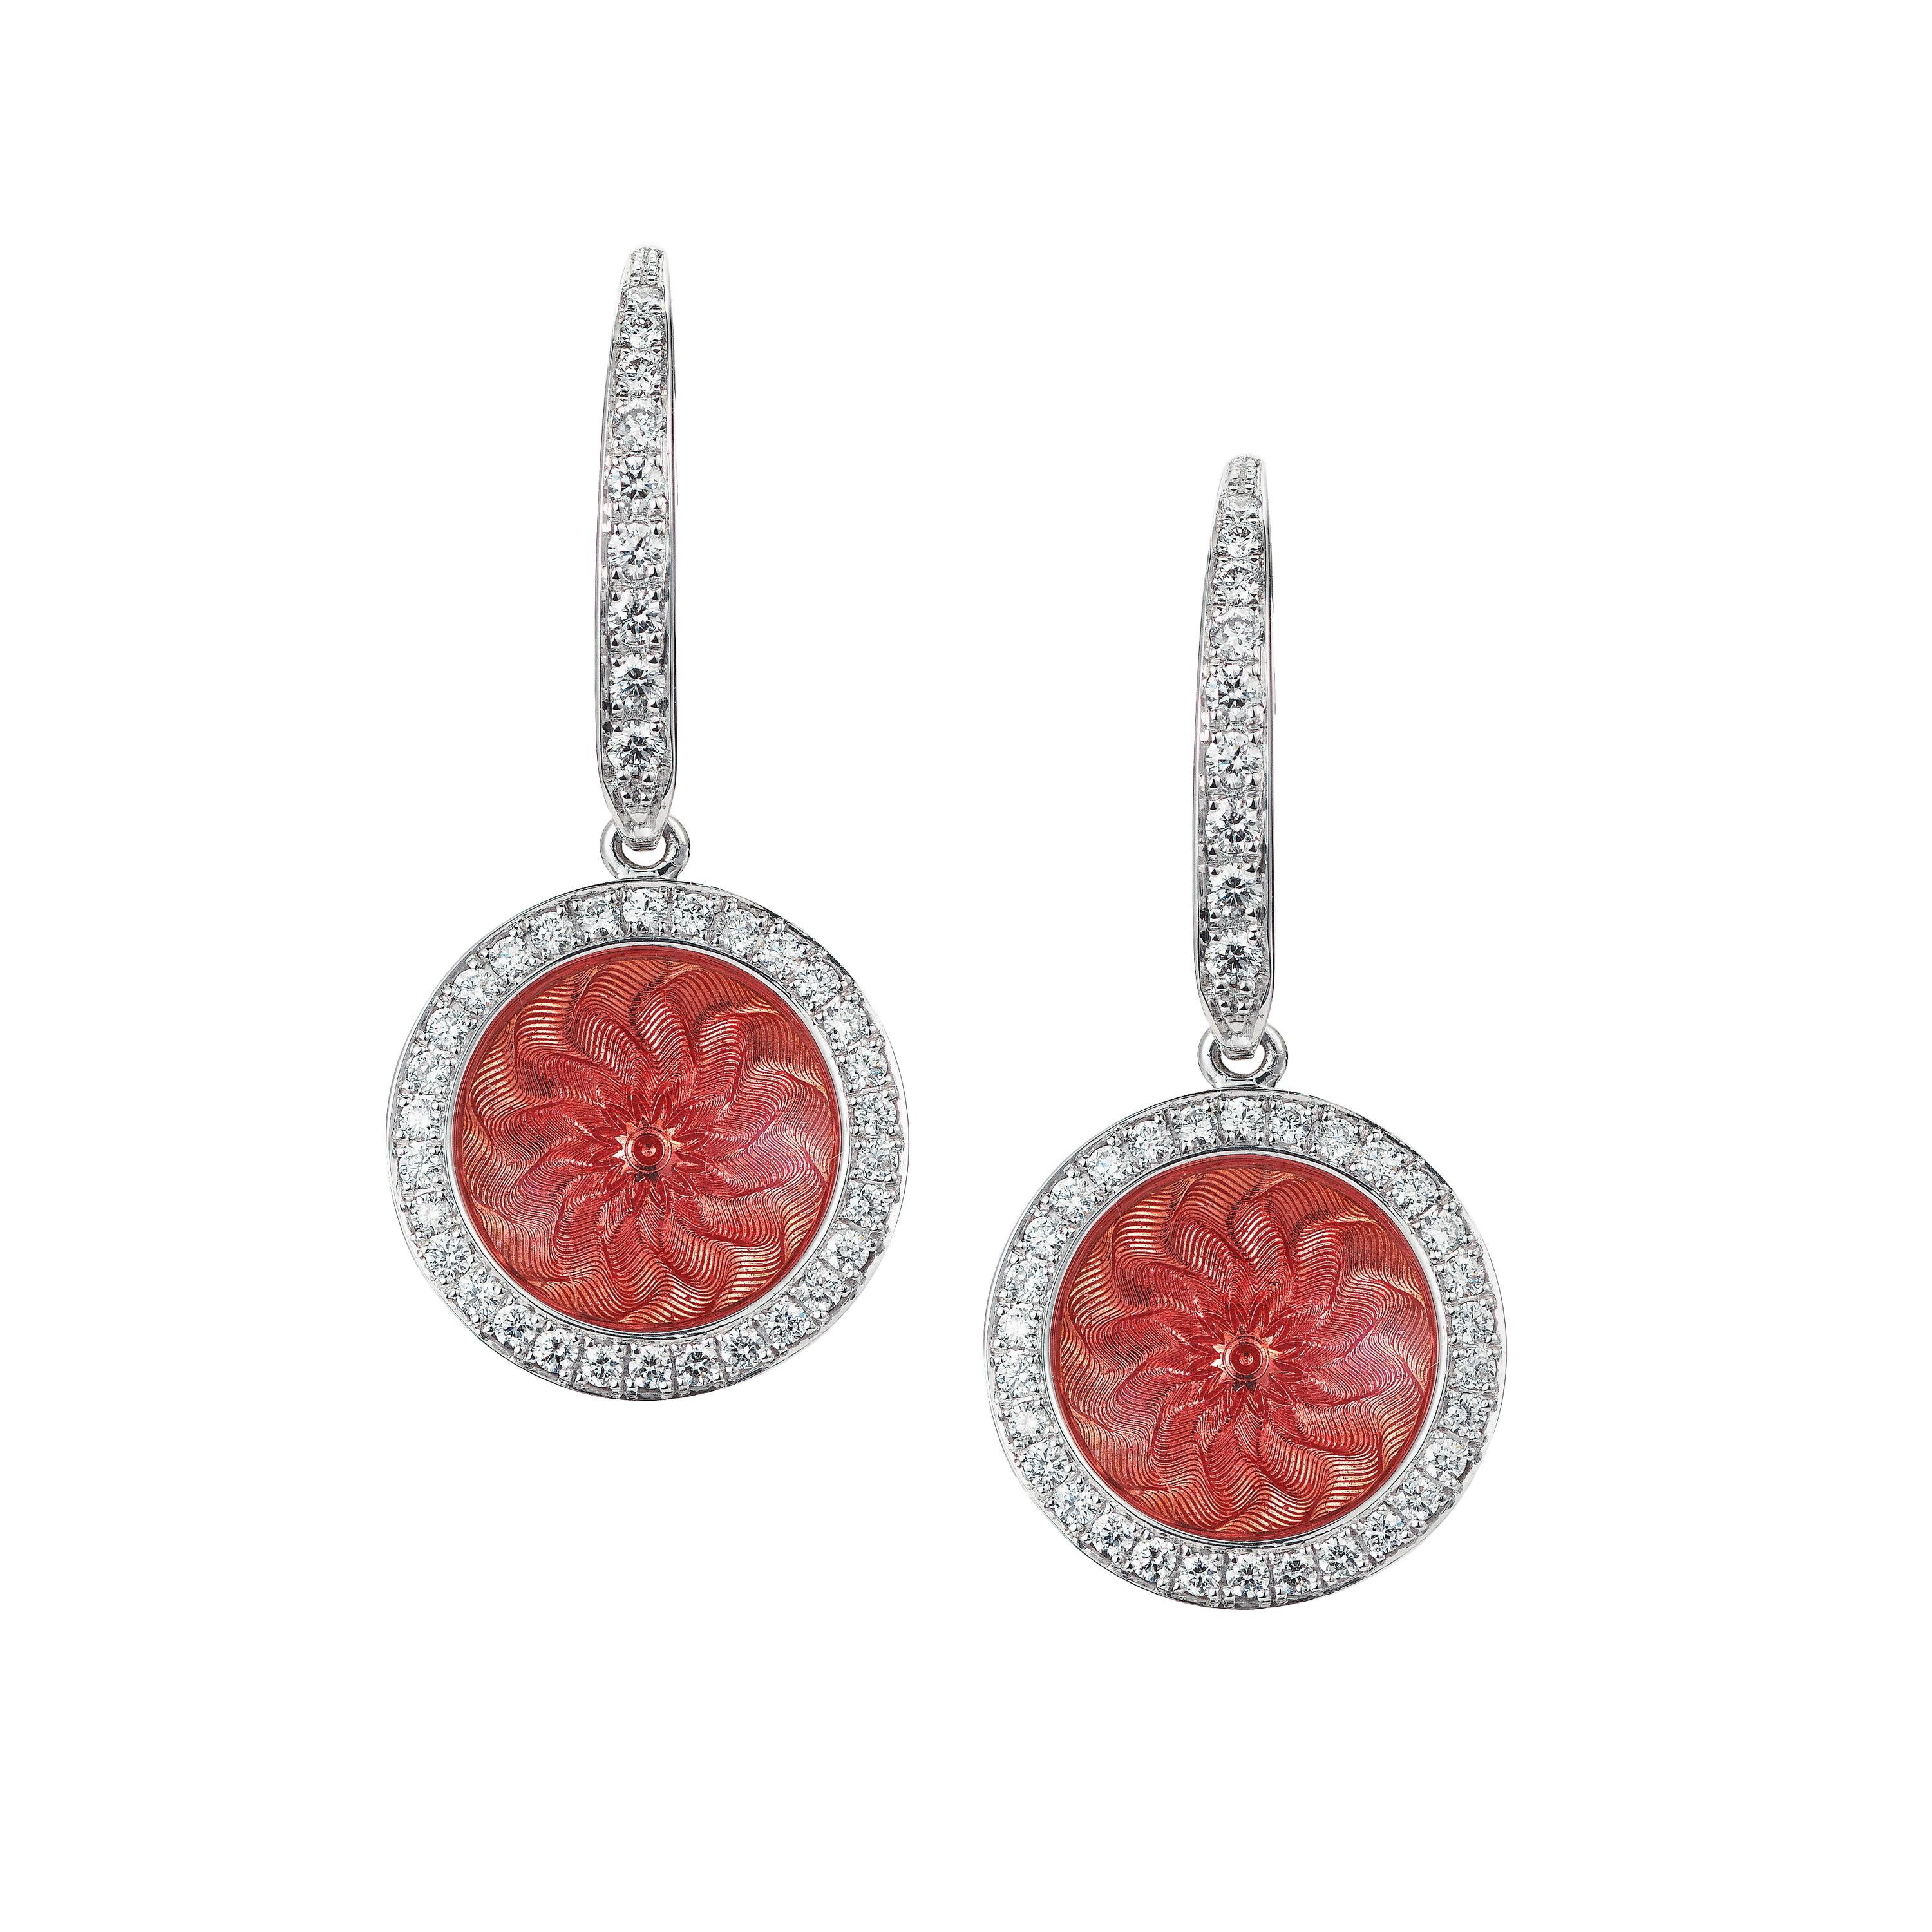 Round Drop Earrings 18k White and Yellow Gold Pink Enamel 78 Diamonds 0.45 ct For Sale